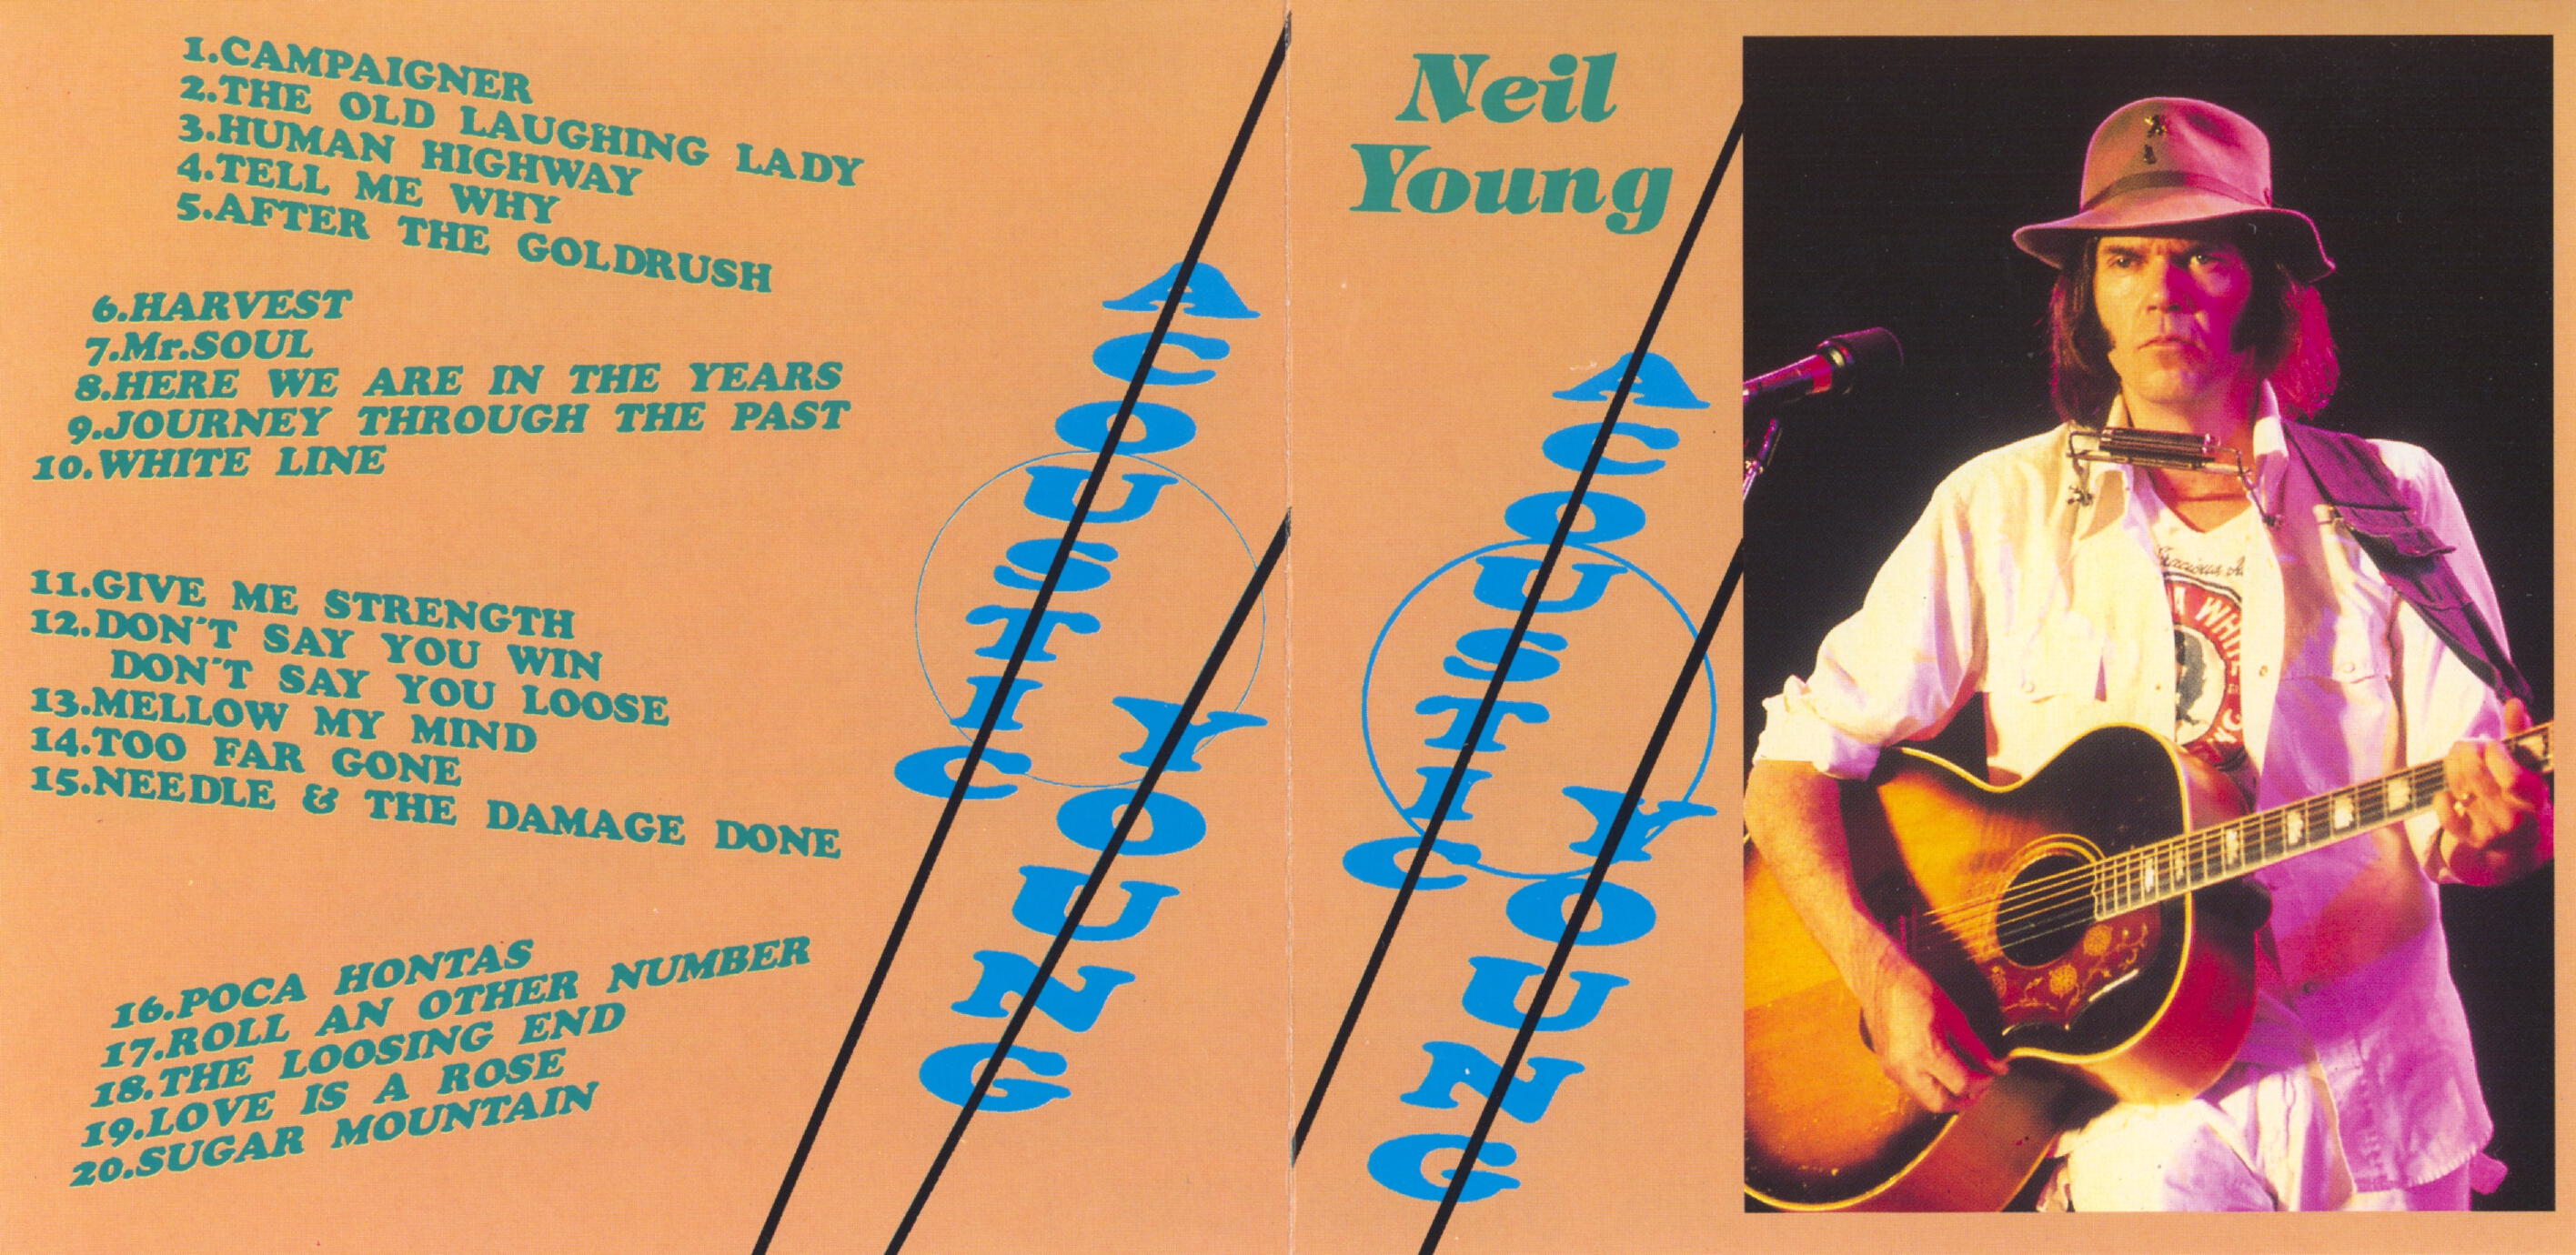 NeilYoung_AcousticYoungBootlegCD (3).jpg